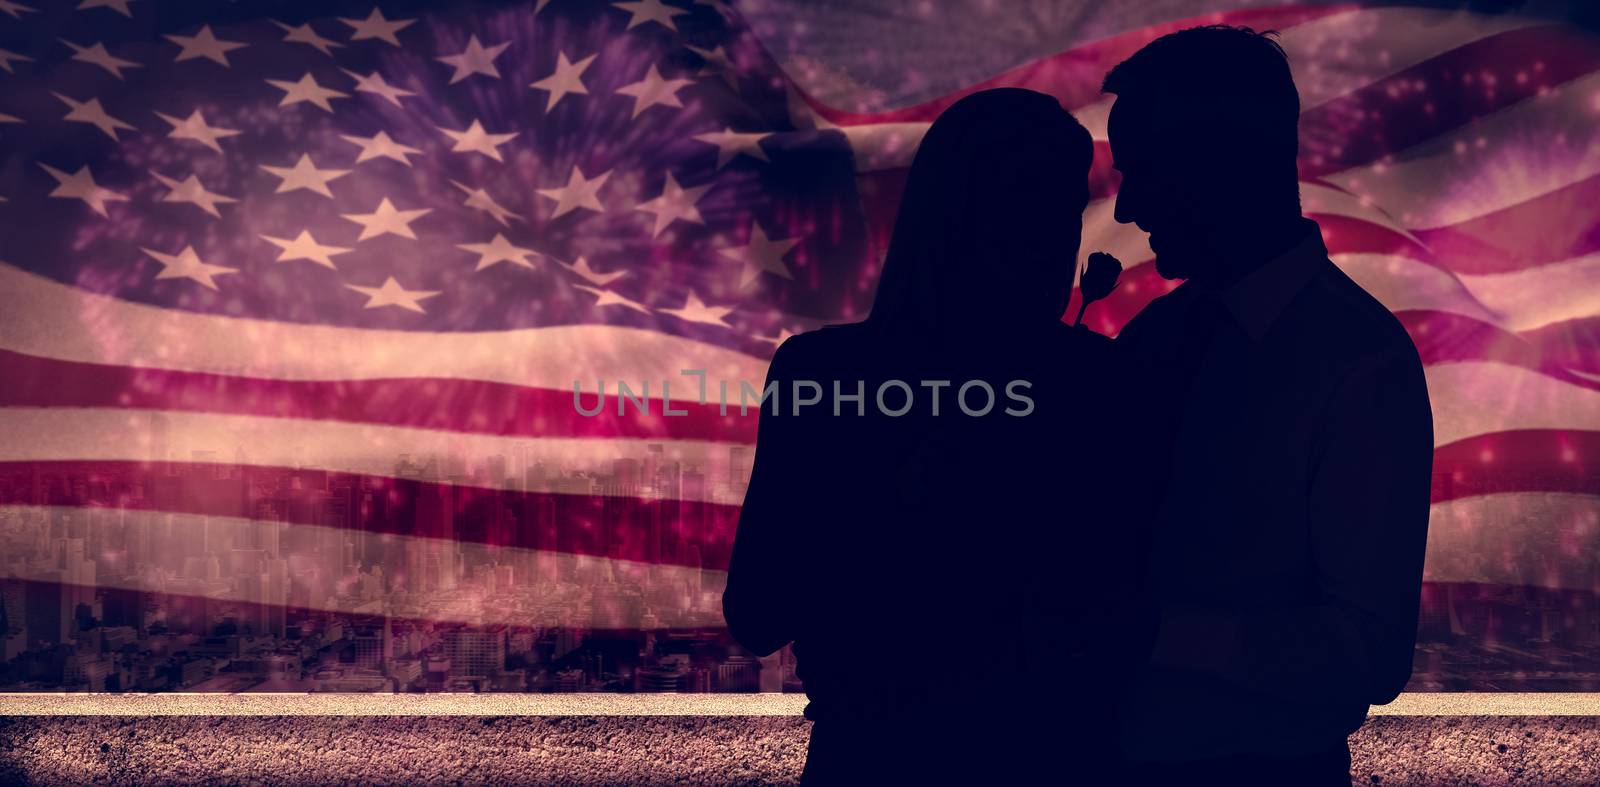 Handsome man giving his wife a pink rose against colourful fireworks exploding on black background